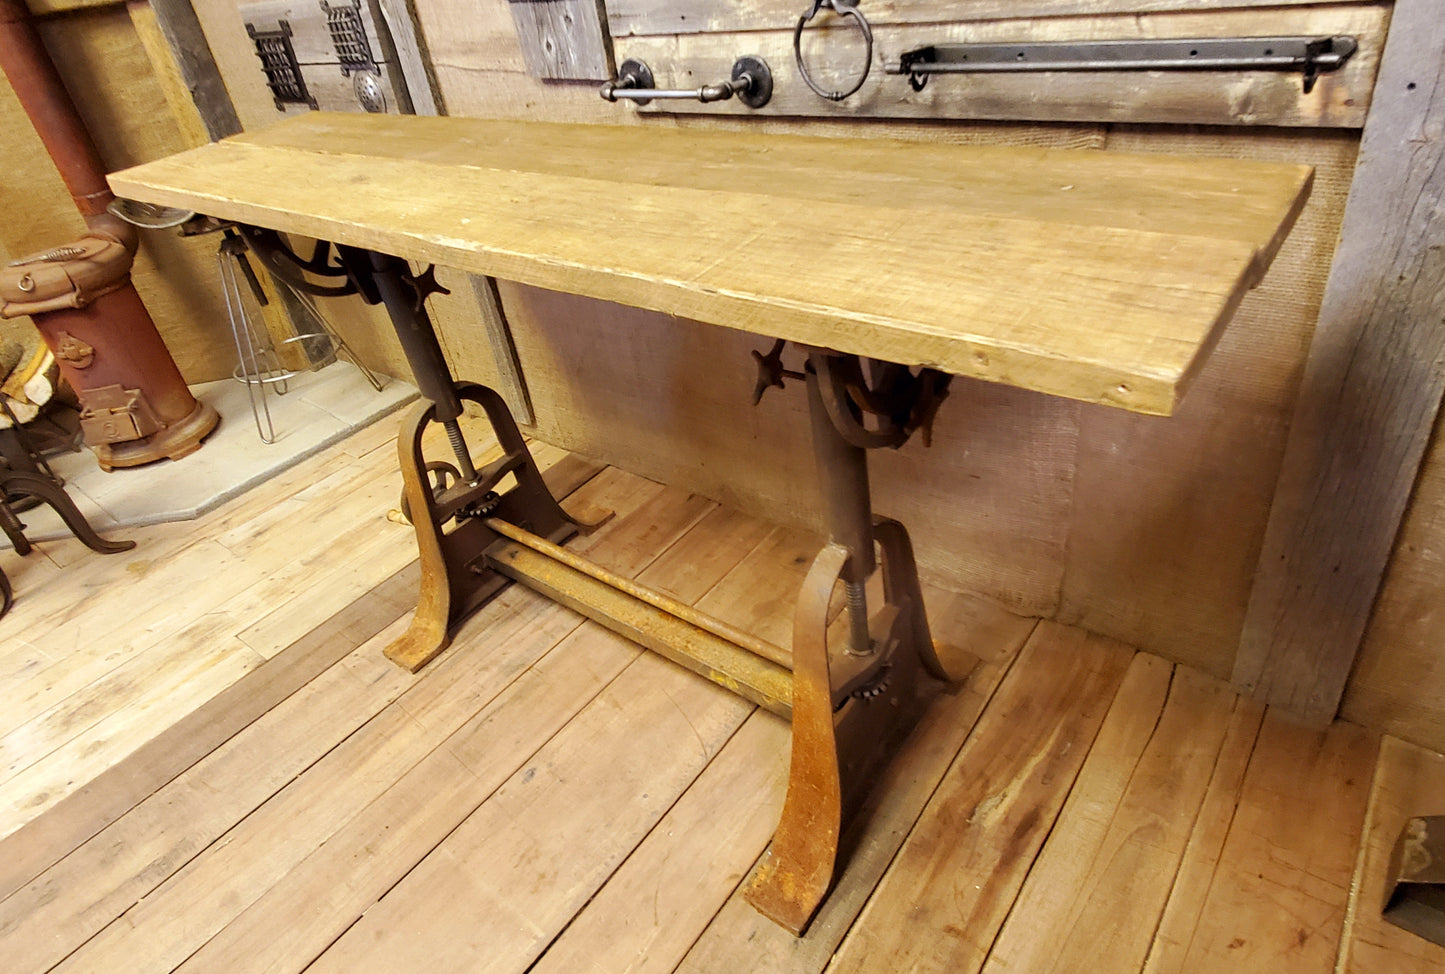 Draughtsman Table - Vintage Industrial, Antique Iron (No Top) - Spearhead Collection - Benches & Tables - Furniture, Re-claimed Wood